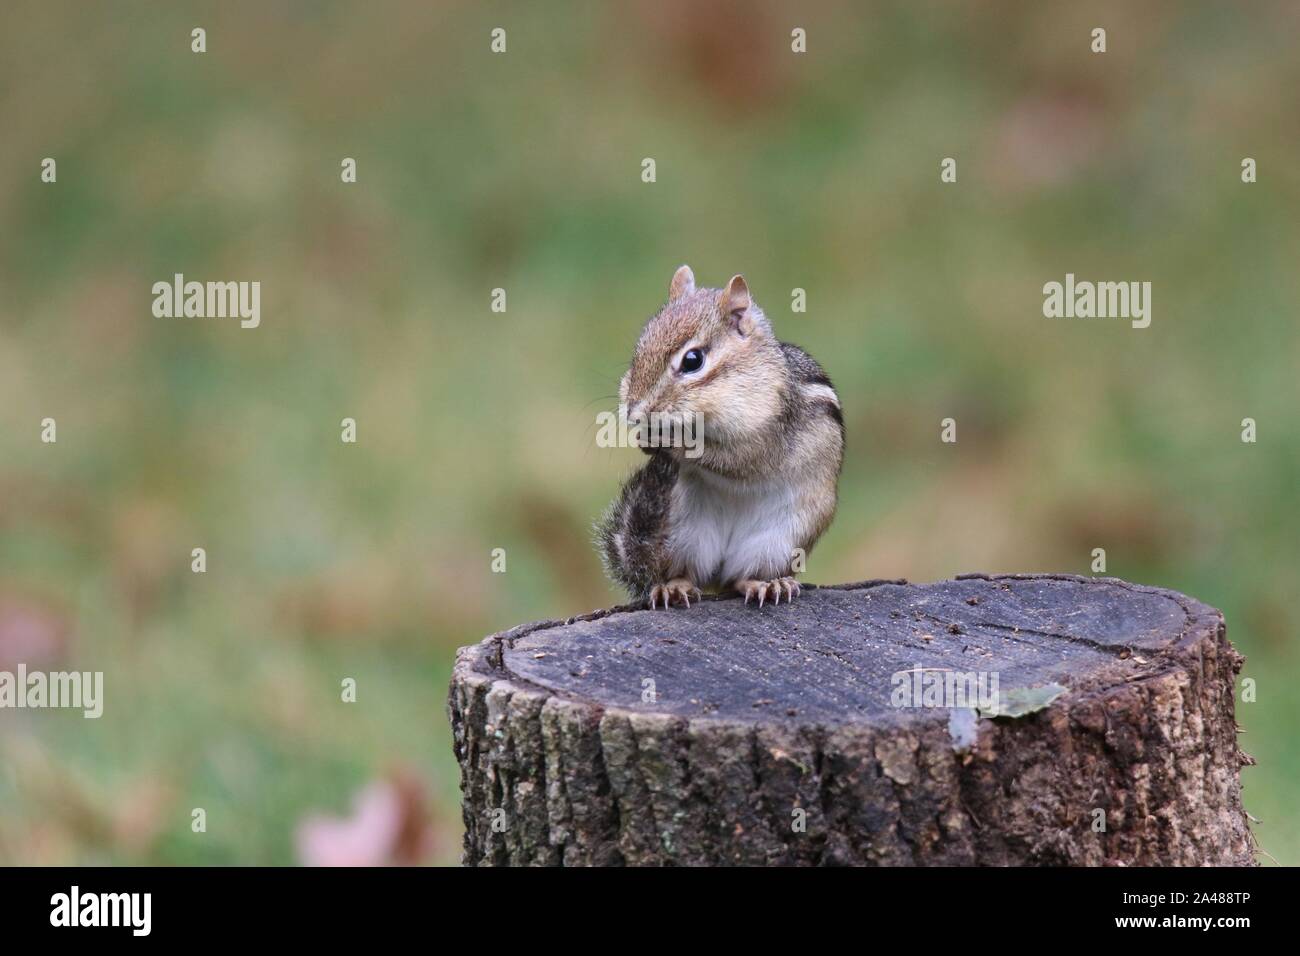 A little eastern chipmunk sitting on a tree stump grooming his tail Stock Photo